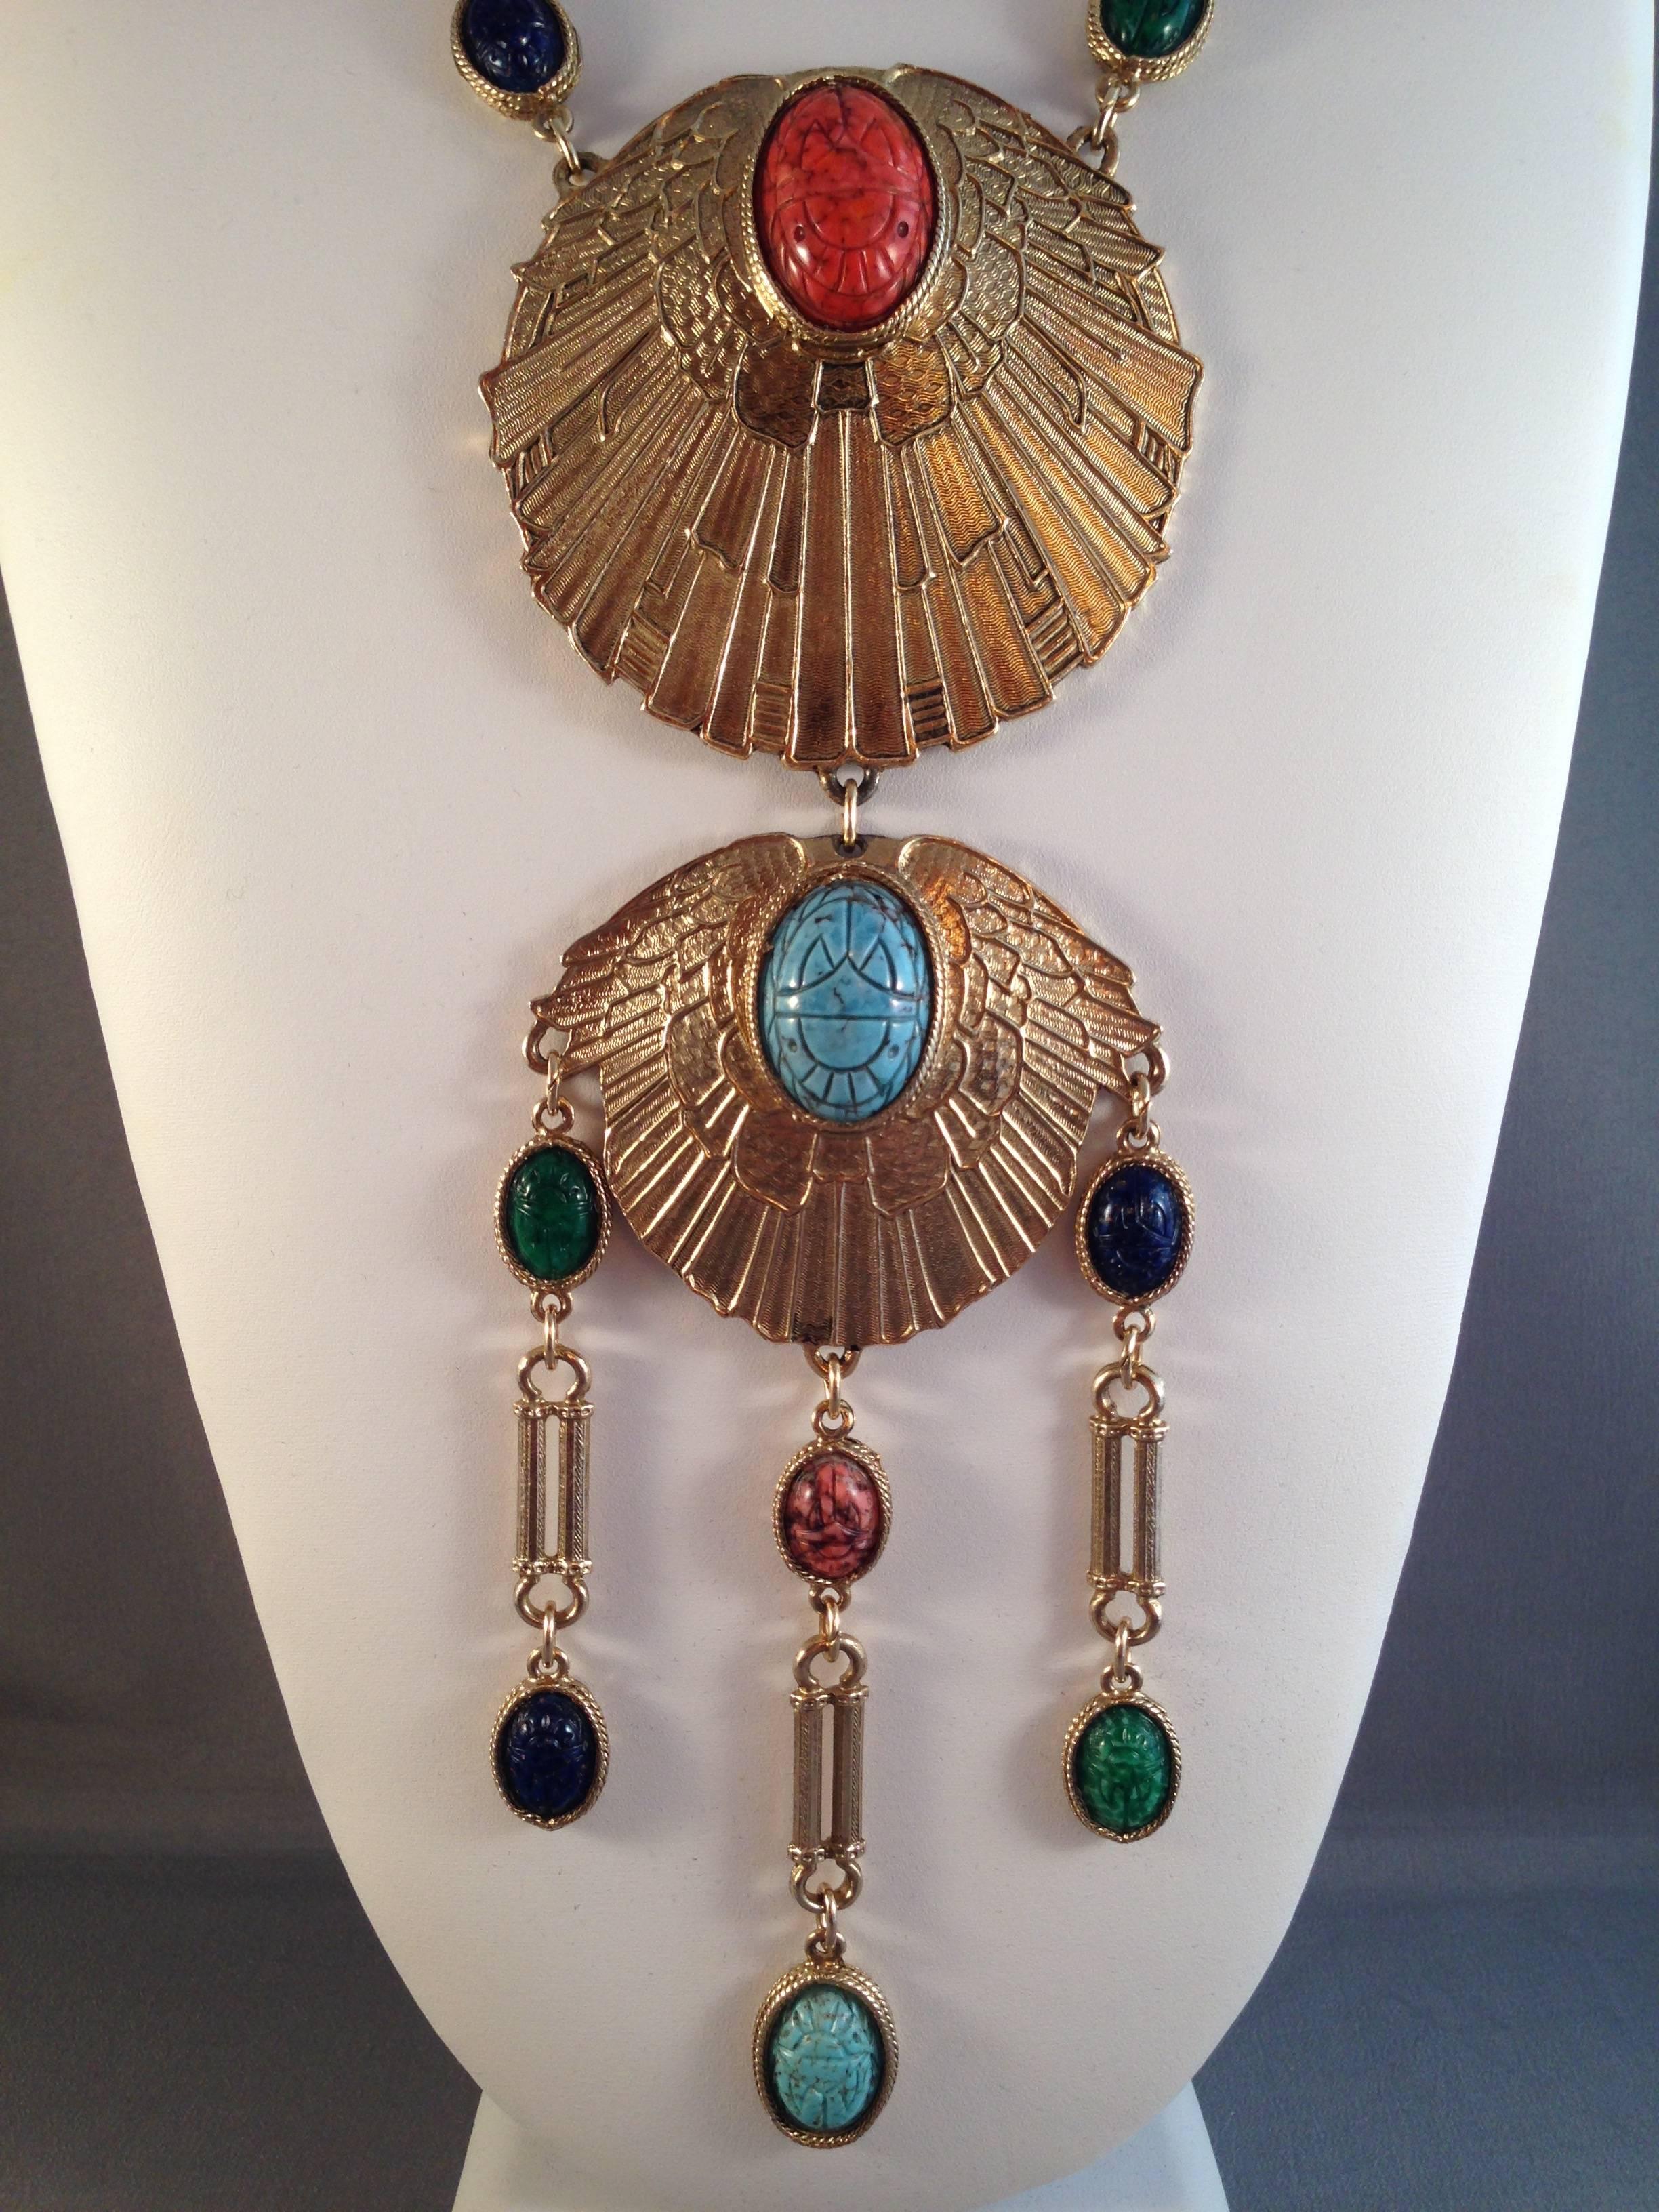 This is an incredible, huge 1970s statement piece from Accessocraft. It is made in the Egyptian revival style. It is gold-tone and has an incredible 8 1/2